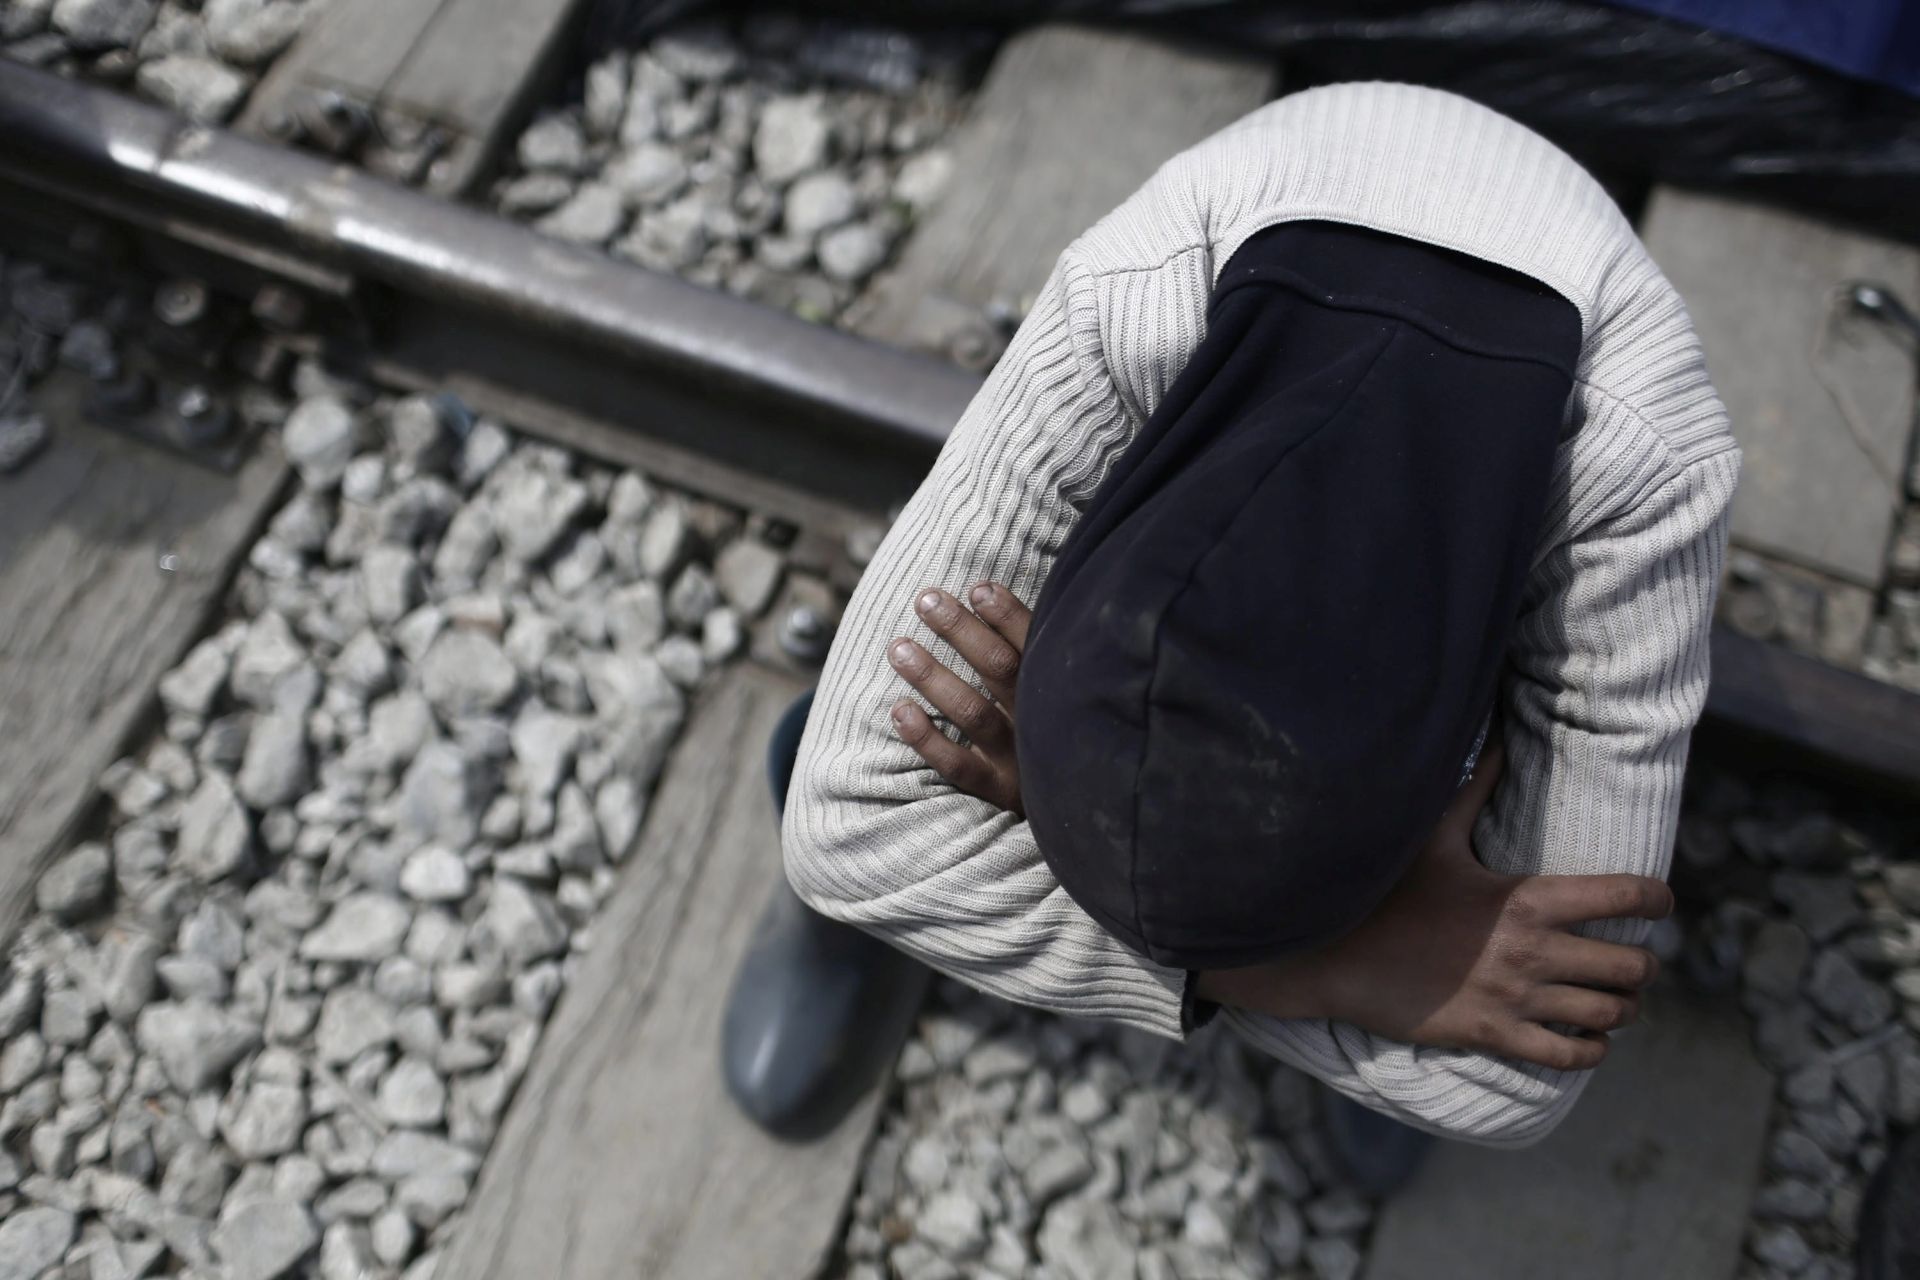 epa05254424 A refugee sits on train tracks during a protest demanding the opening of the borders at the border line between Greece and FYROM, at the refugee camp of Idomeni, 11 April 2016. Thousands of refugees are stuck in Greece following the closure of the borders of the Balkan route and after the implementation of the migration agreement between the European Union (EU) and Turkey.  EPA/KOSTAS TSIRONIS